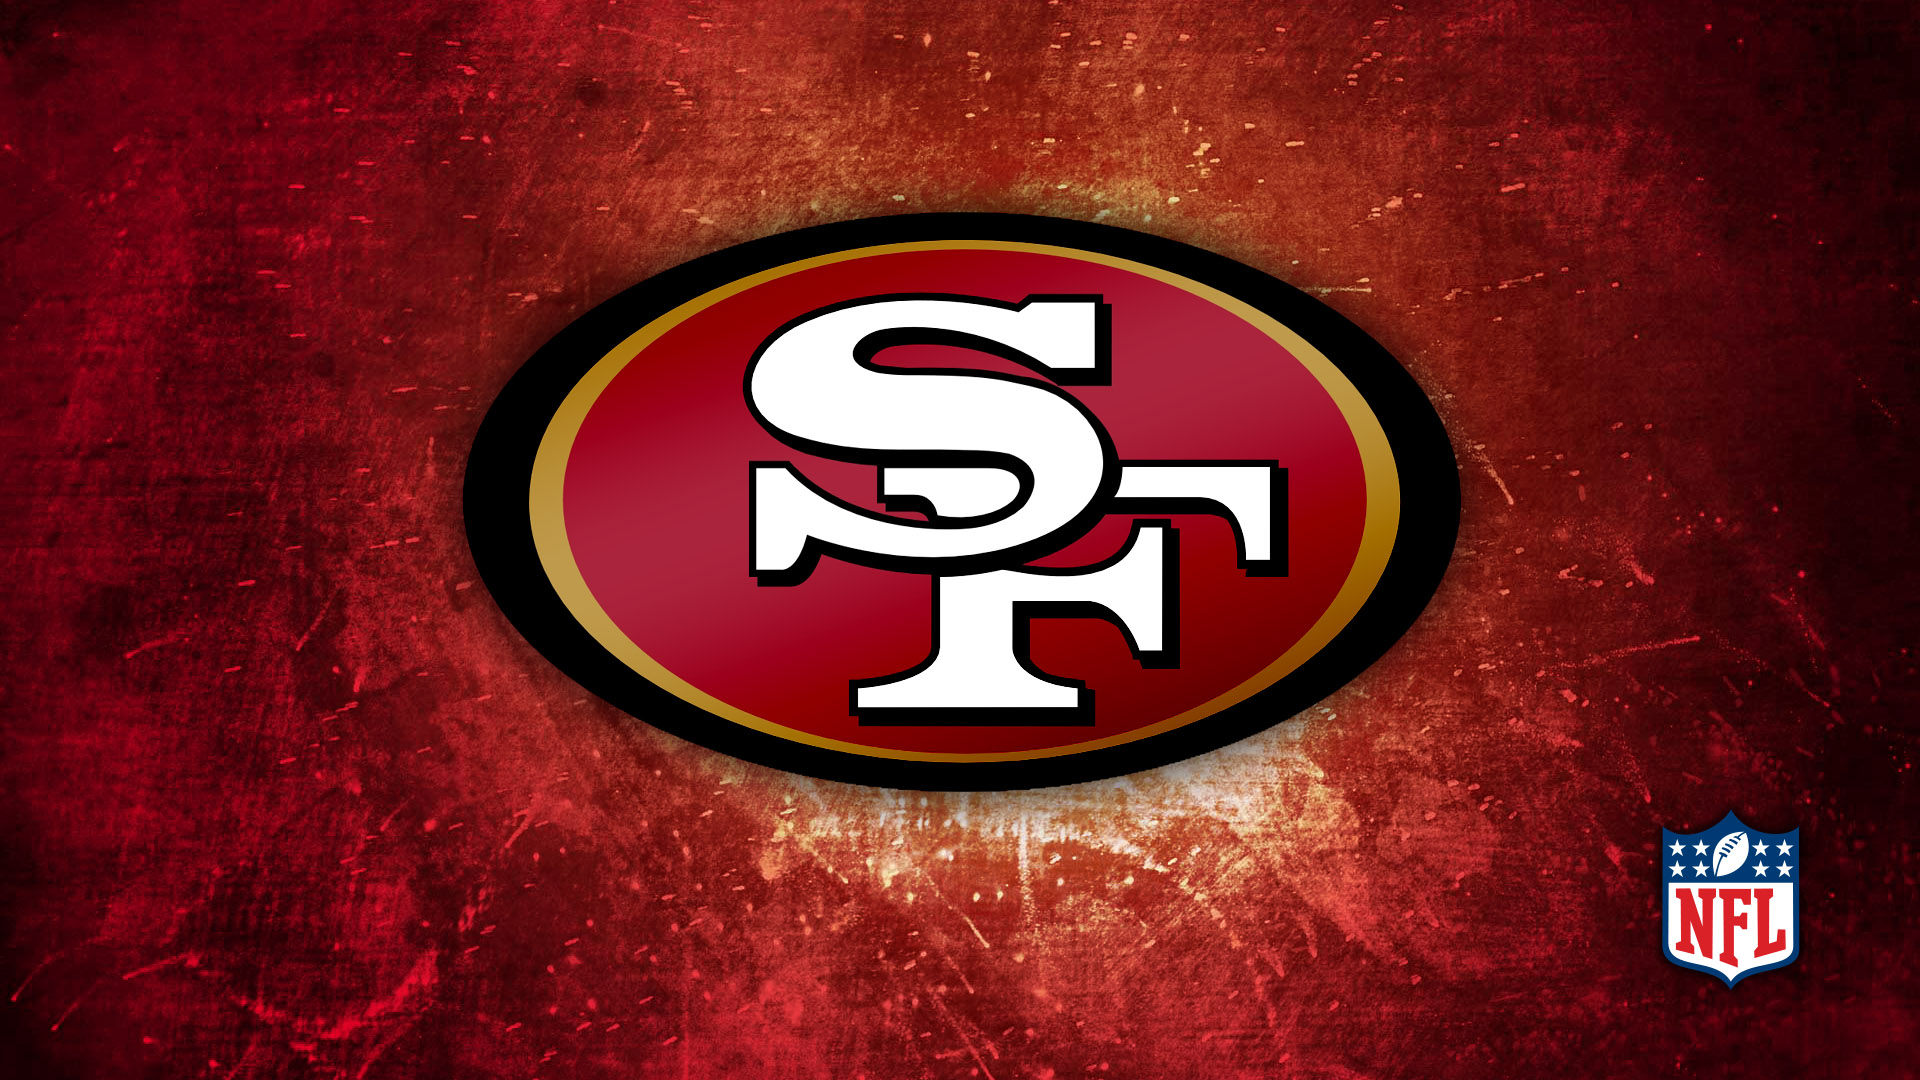 49ers Red Gold Logo HD Image Sports Nfl Football